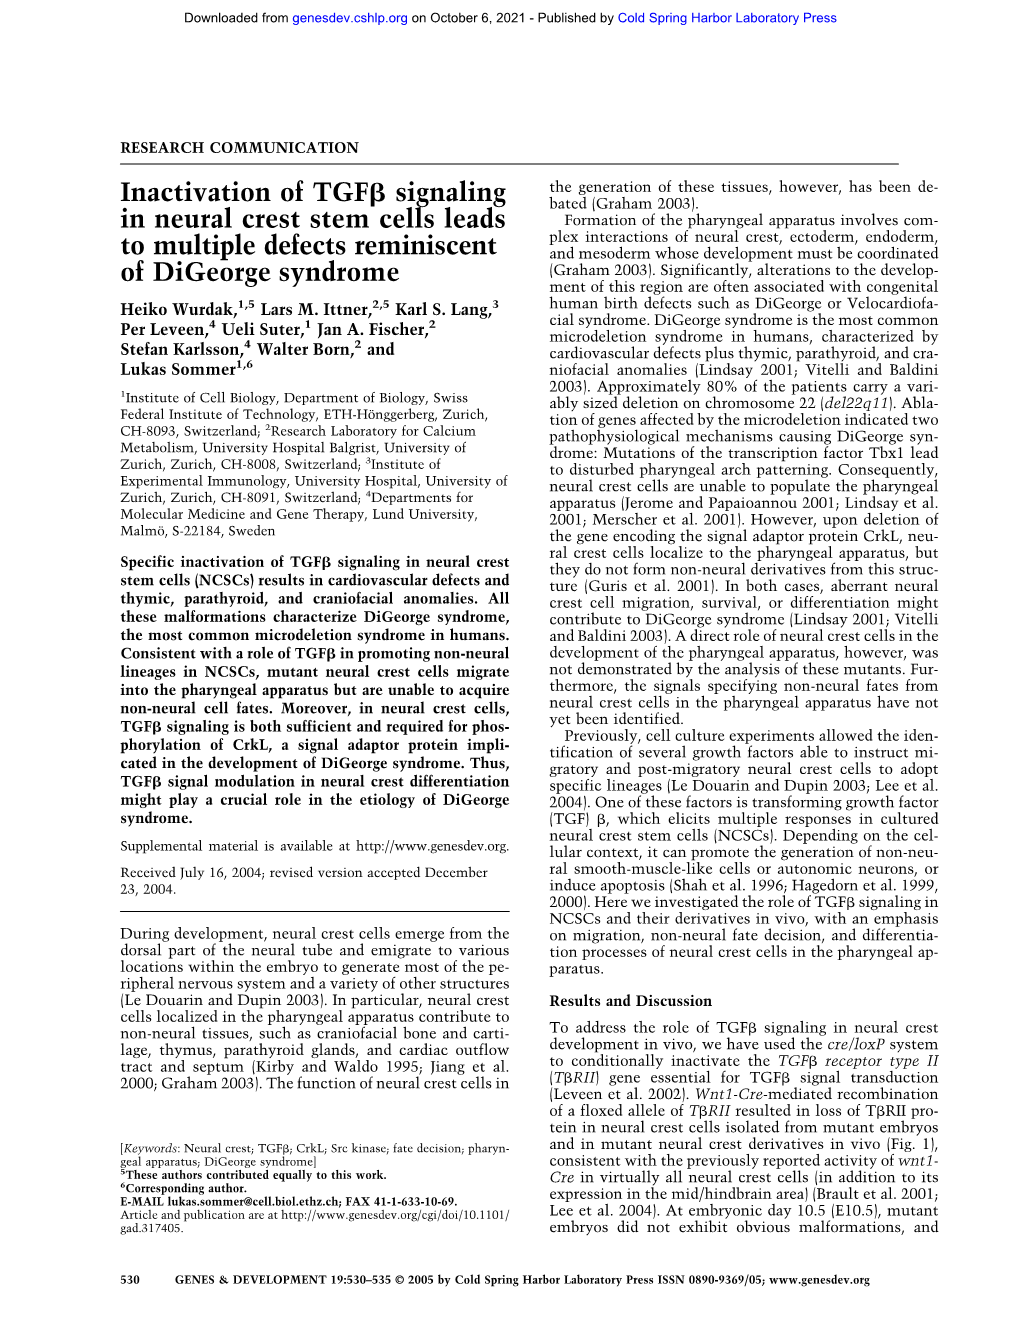 Inactivation of Tgfß Signaling in Neural Crest Stem Cells Leads To